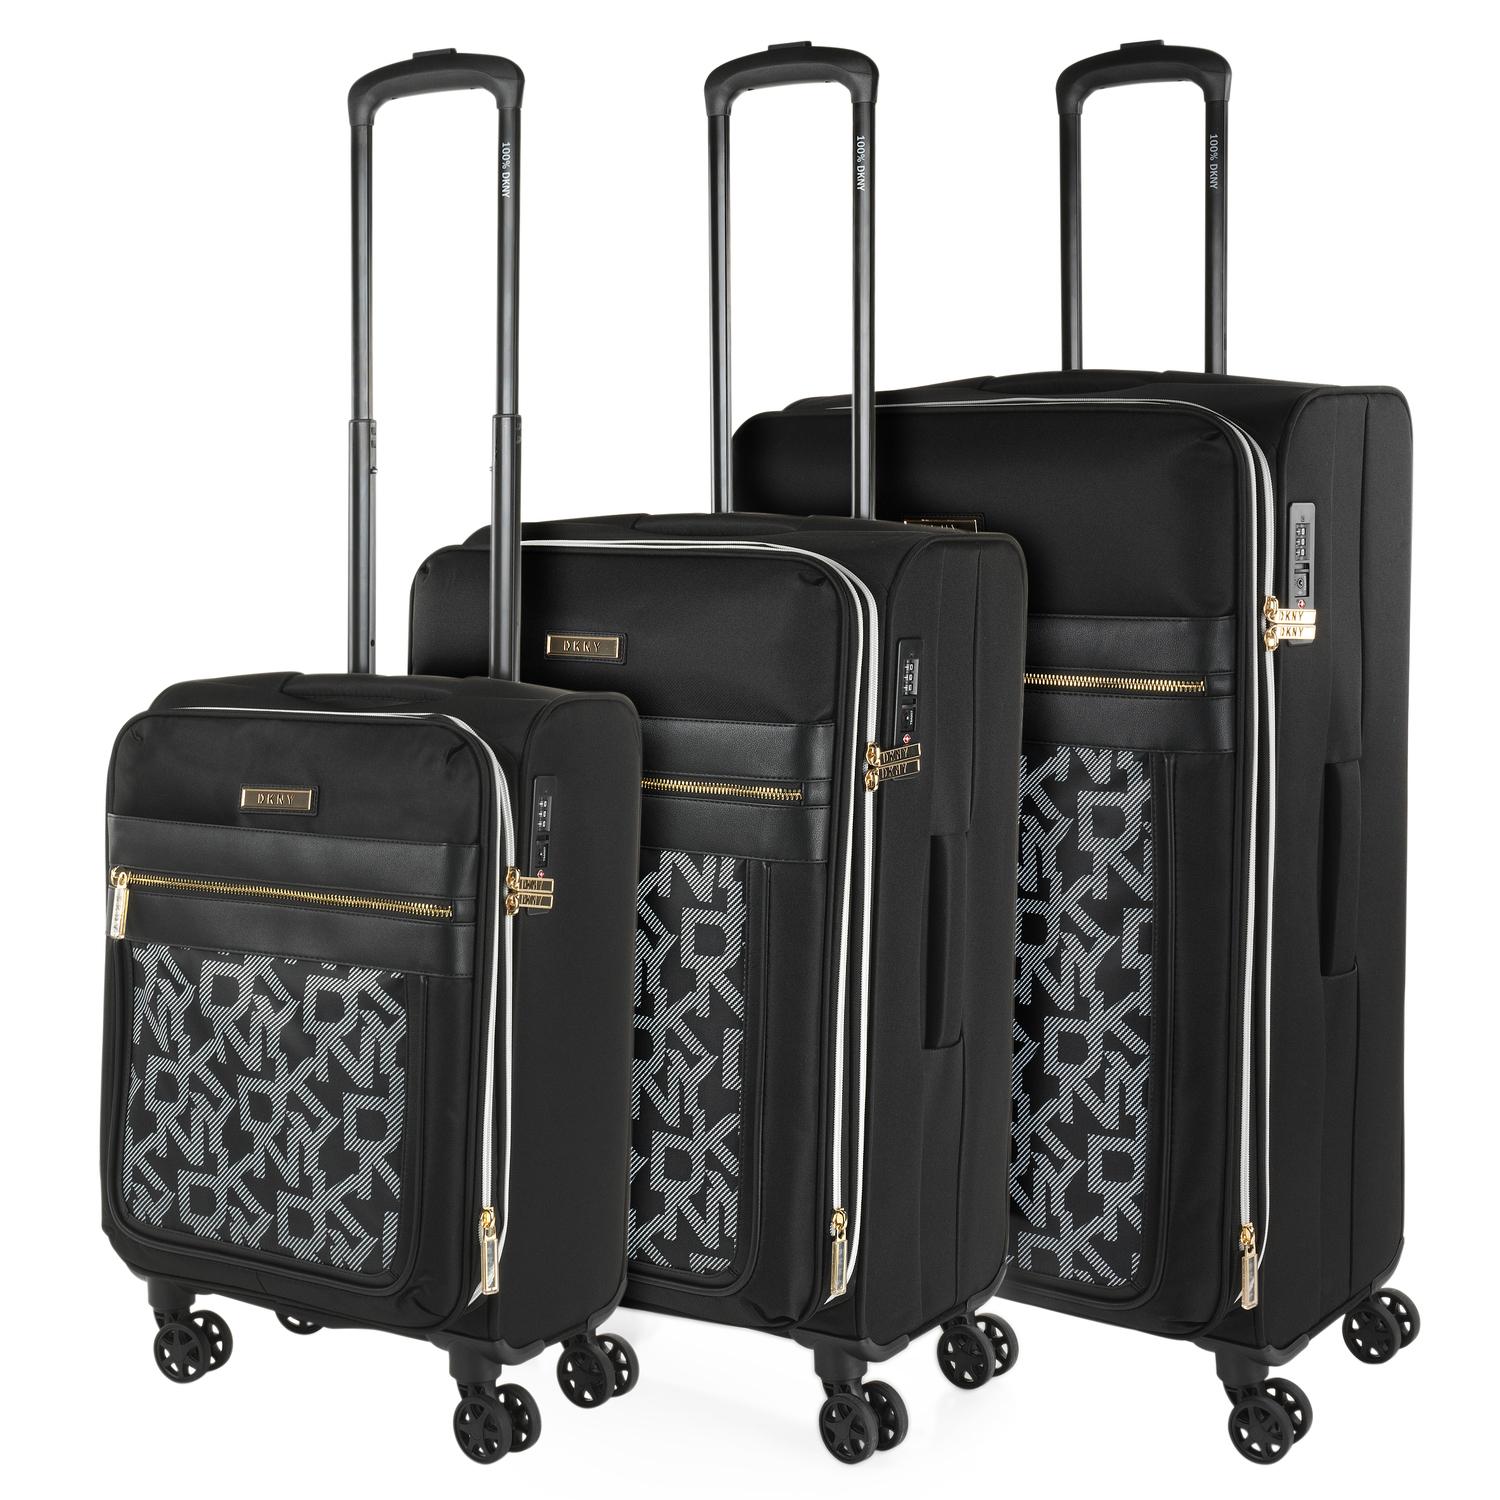 Dkny-624 Set/3 Trolleys After Hours Dkny Dkny-624 After Hours